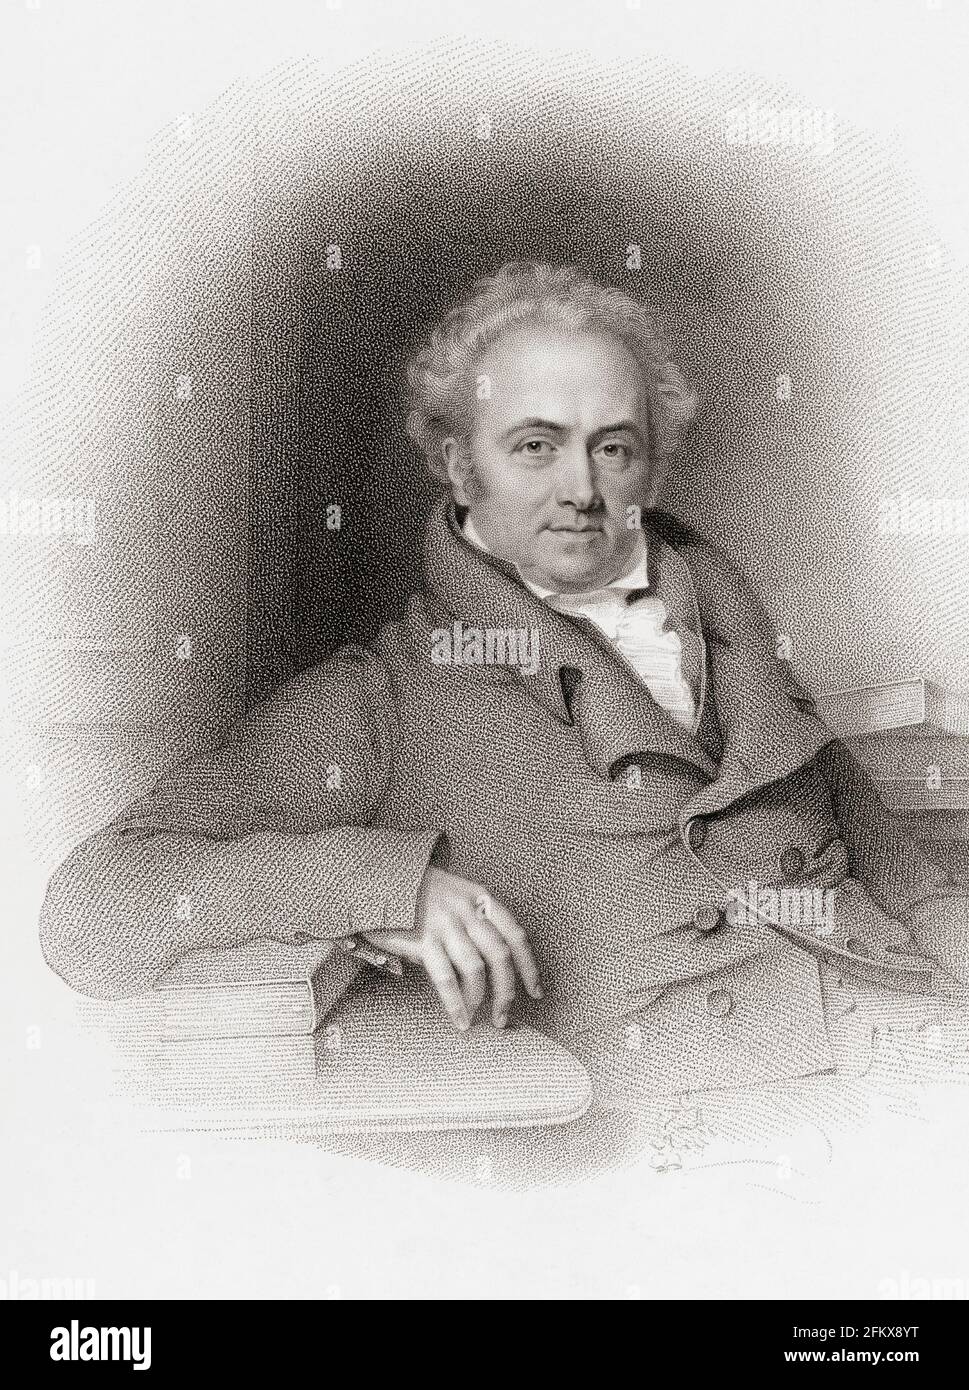 Sir Astley Paston Cooper, 1st Baronet, 1768 -1841.  English surgeon and anatomist.  From a work by John Samuel Agar after Abraham Wivell. Stock Photo